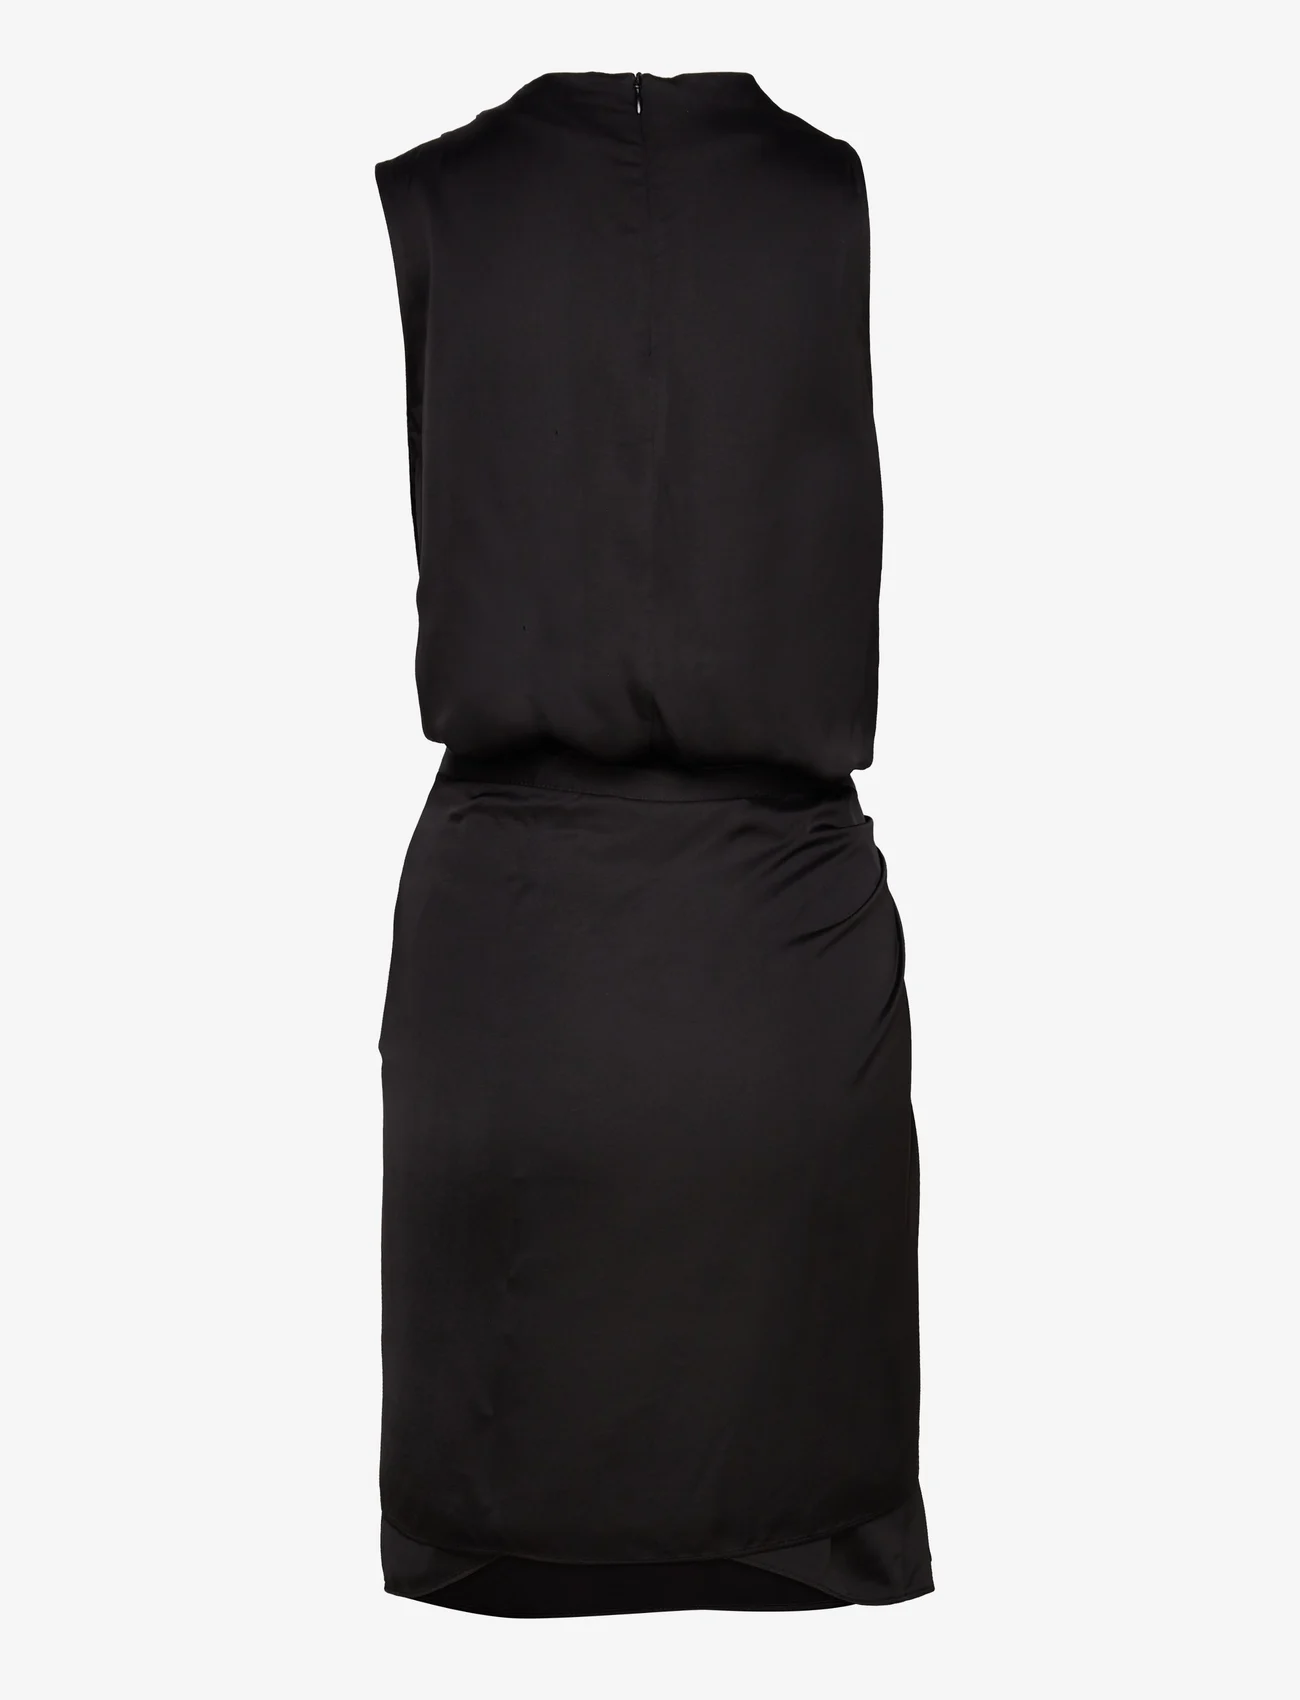 Ahlvar Gallery - Telly short dress - party wear at outlet prices - black - 1